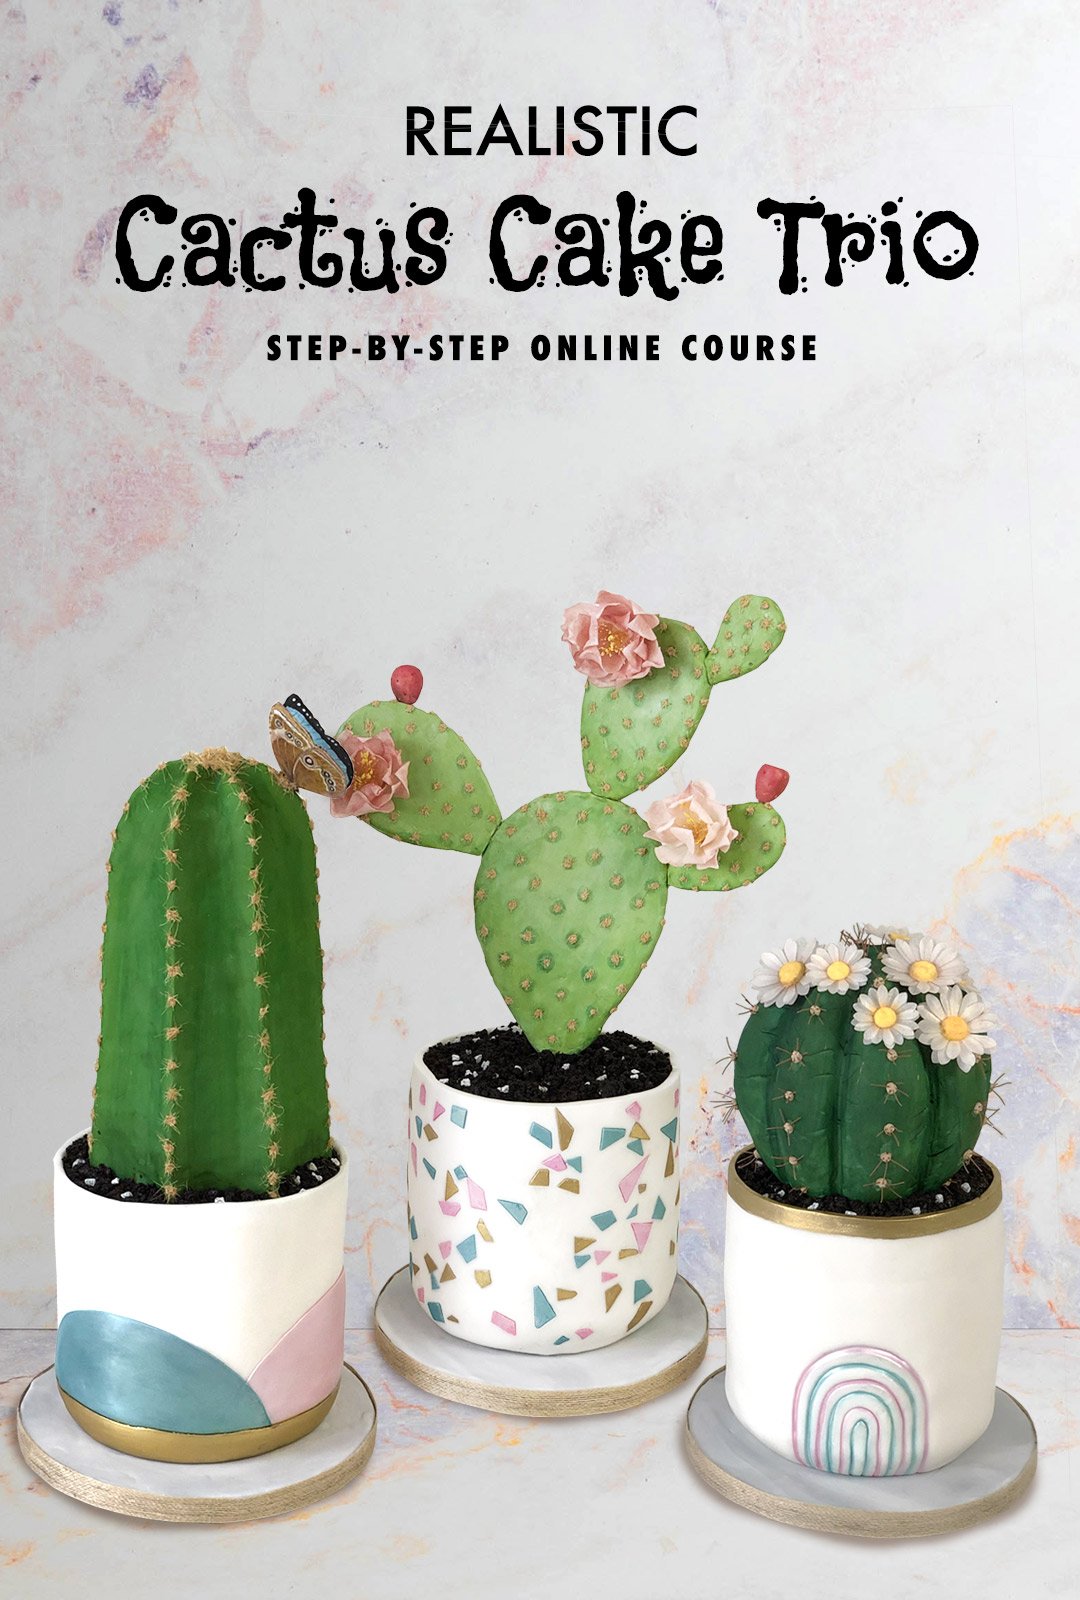 Three cakes sculpted to look like cacti in plant pots